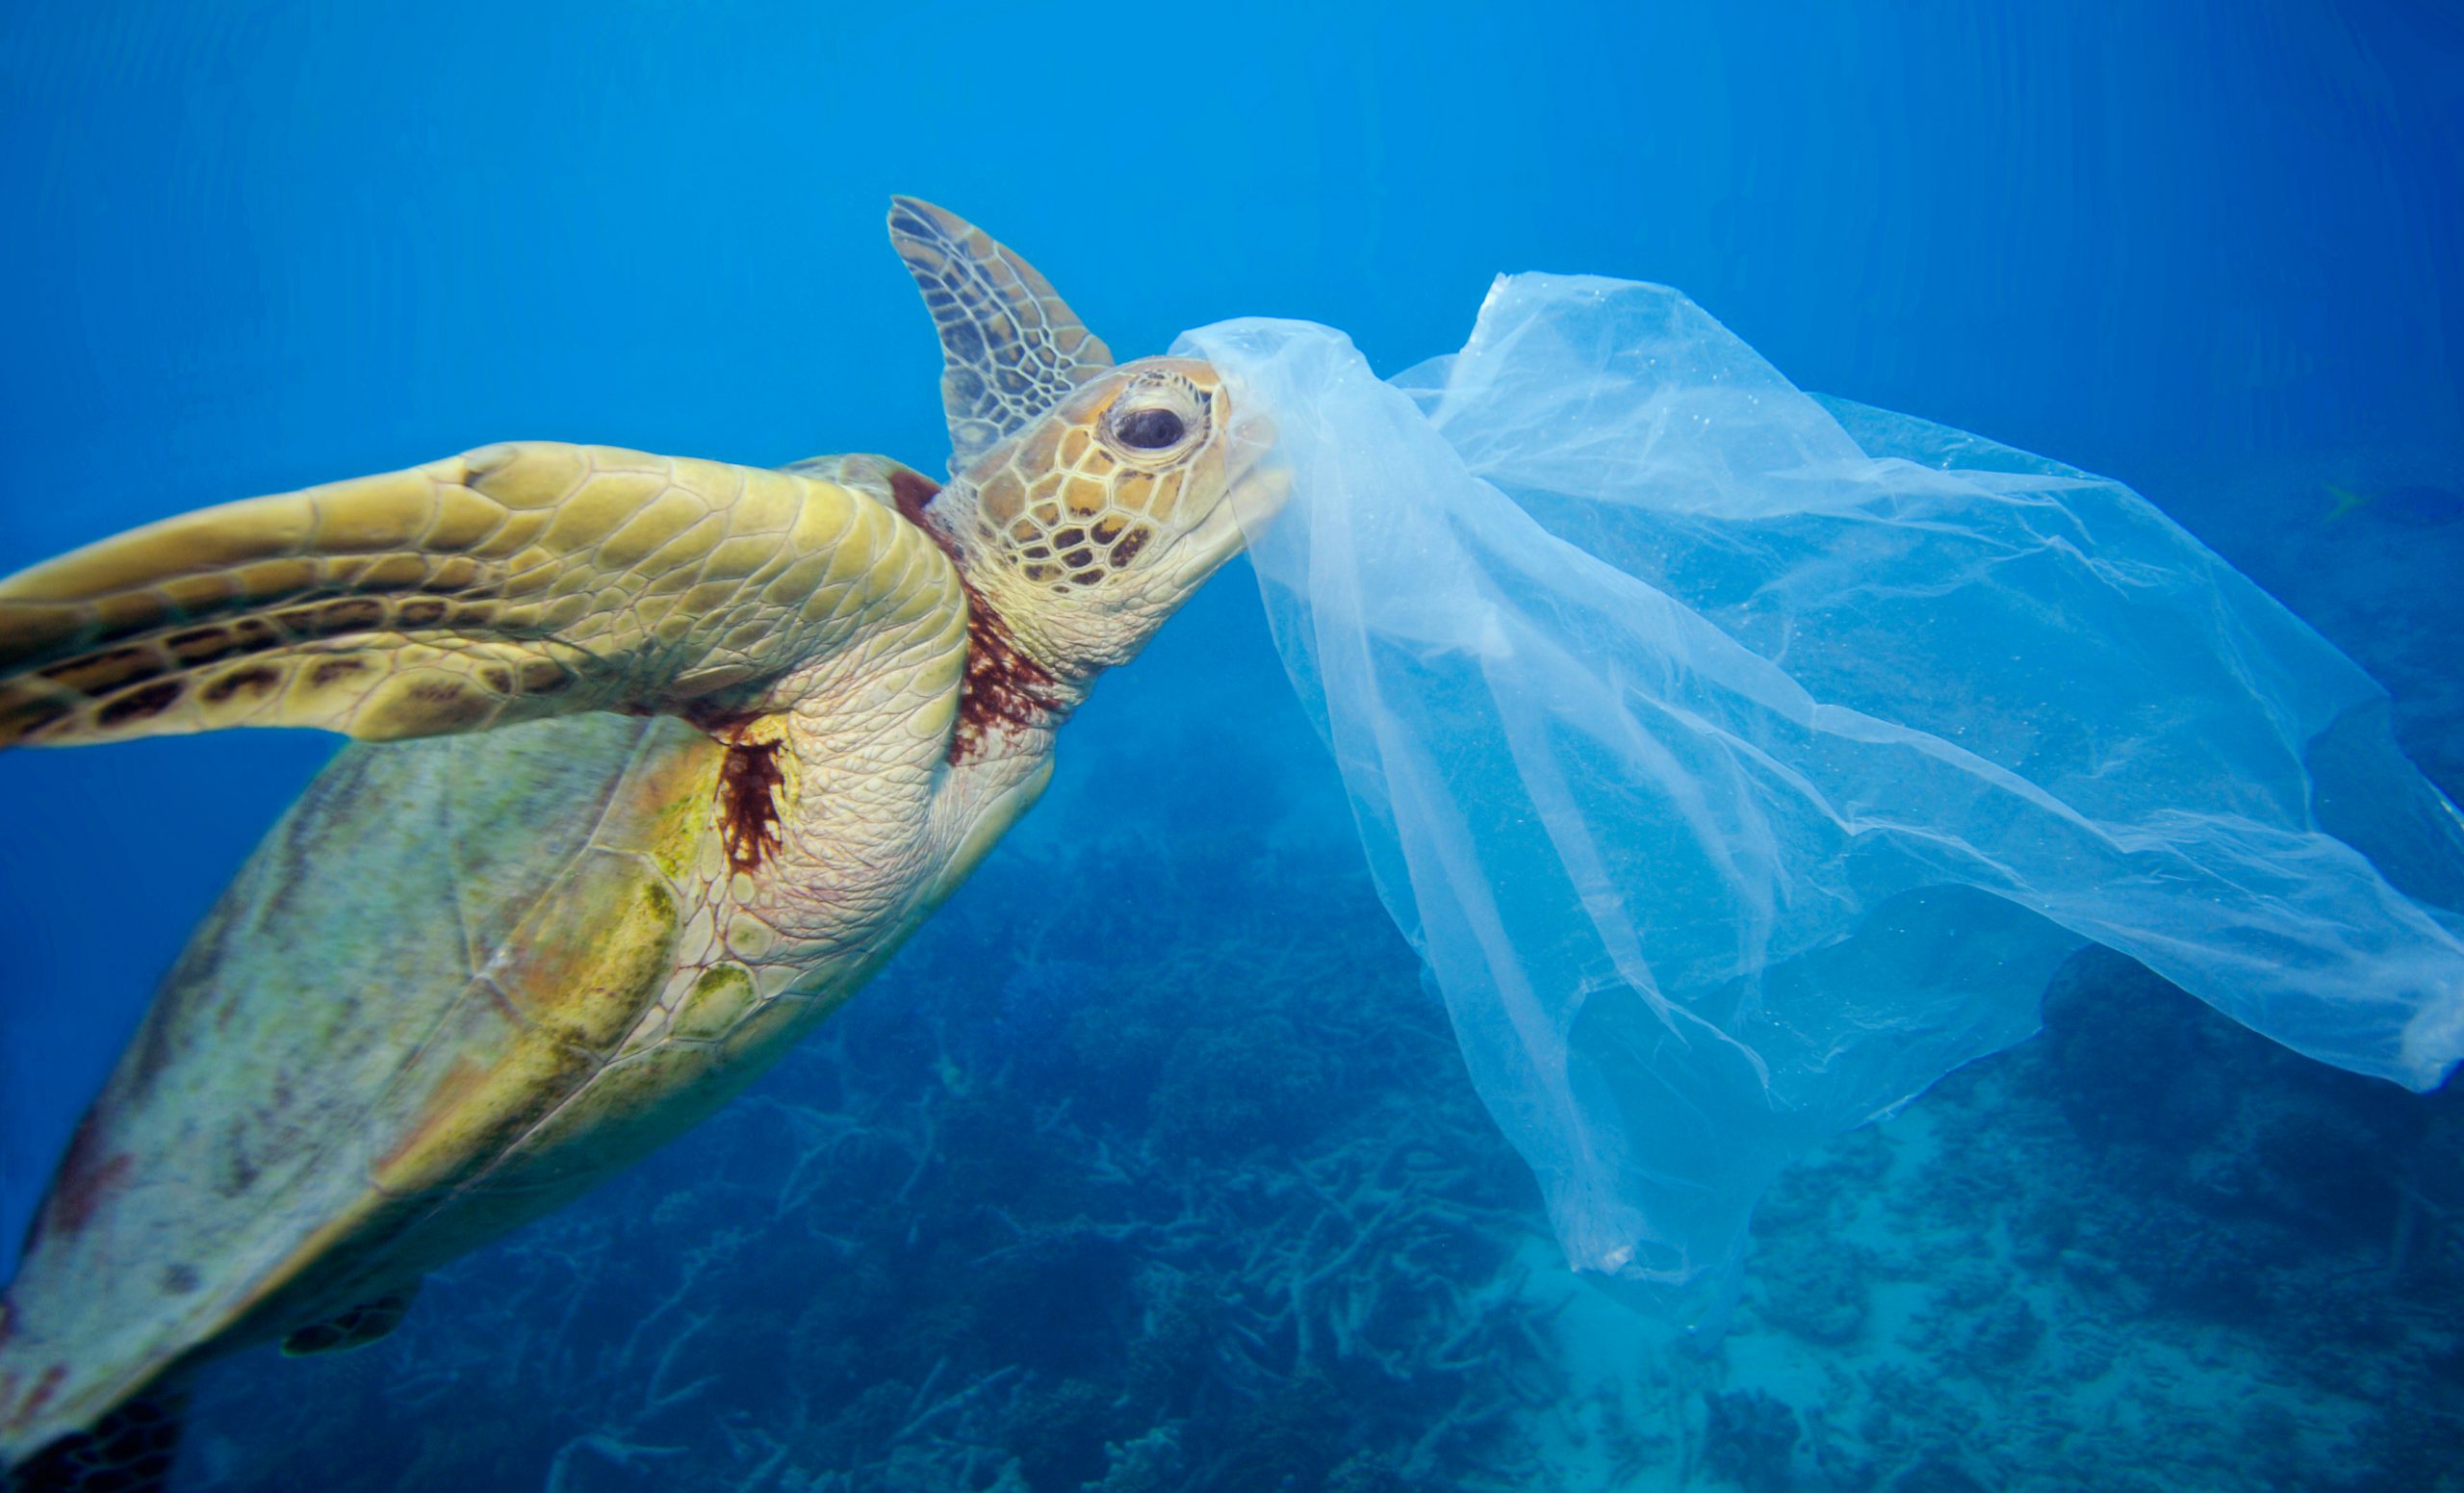 <p>Eight million tonnes of plastic finds its way into the oceans each year, threatening marine life and human health (Image: <a href="http://media.greenpeace.org/archive/Turtle-and-Plastic-in-the-Ocean-27MZIFJJSHP_J.html">Troy Mayne/ Greenpeace</a>)</p>